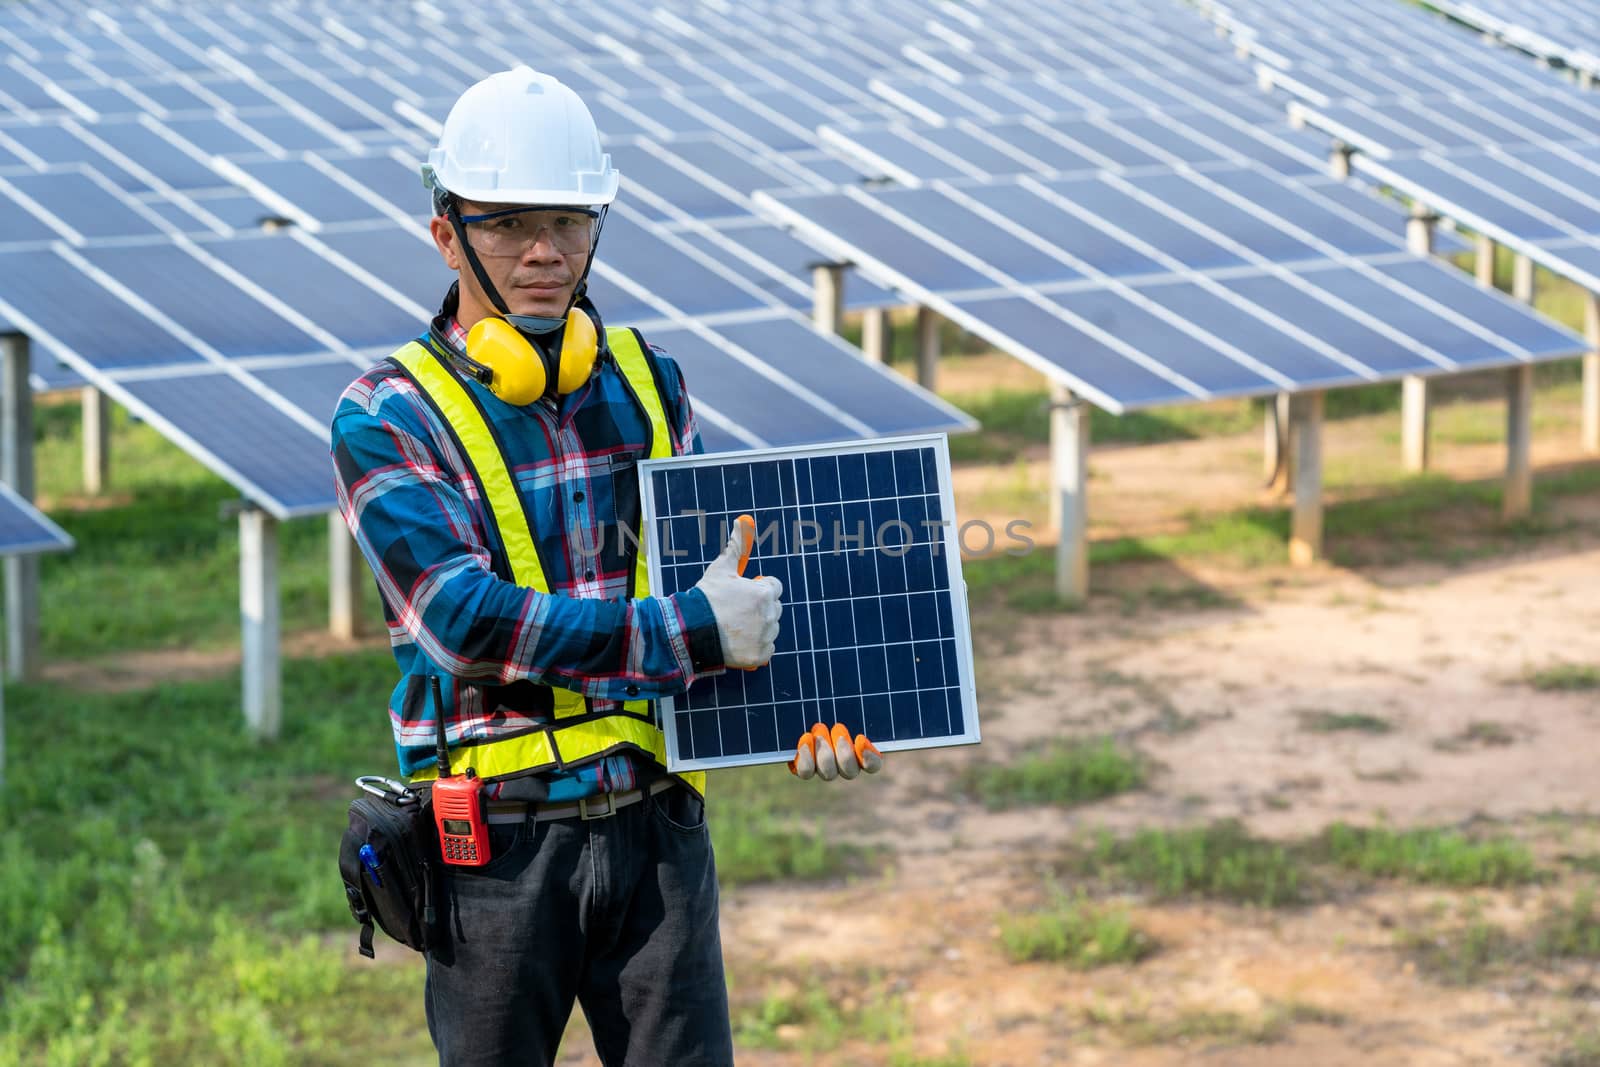 Engineer checking solar panel in routine operation by Visoot